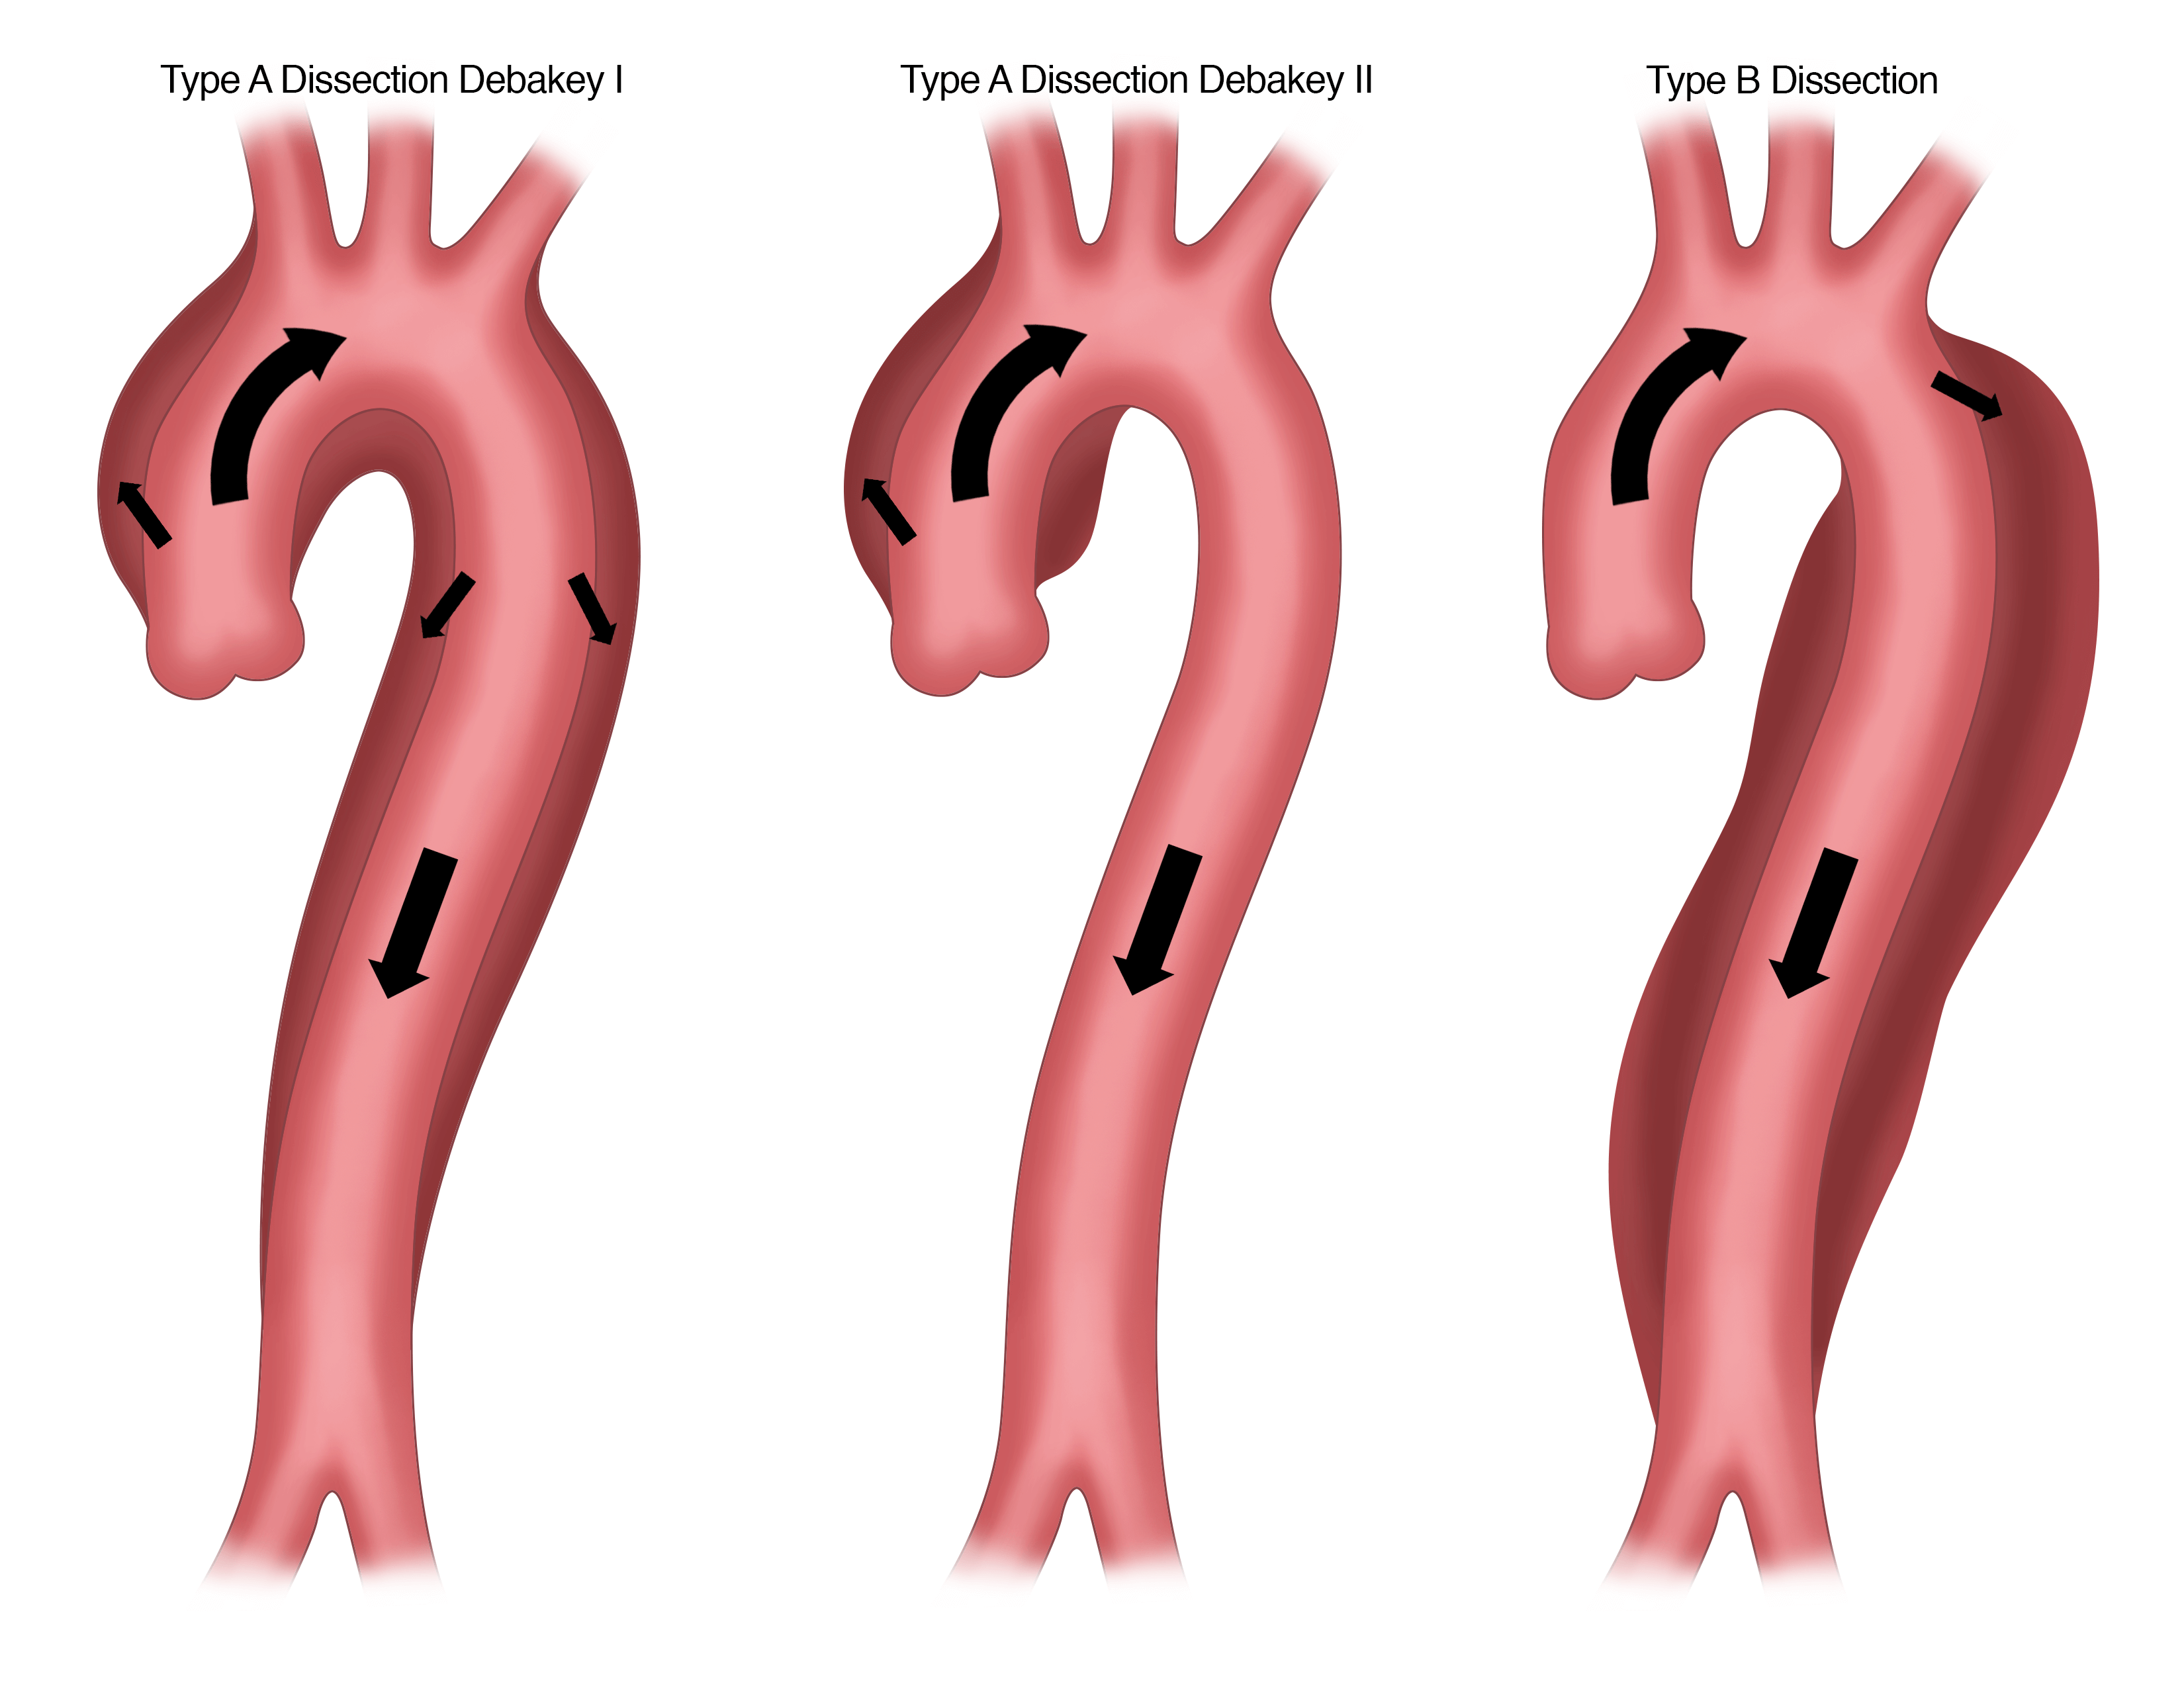 aortic dissection